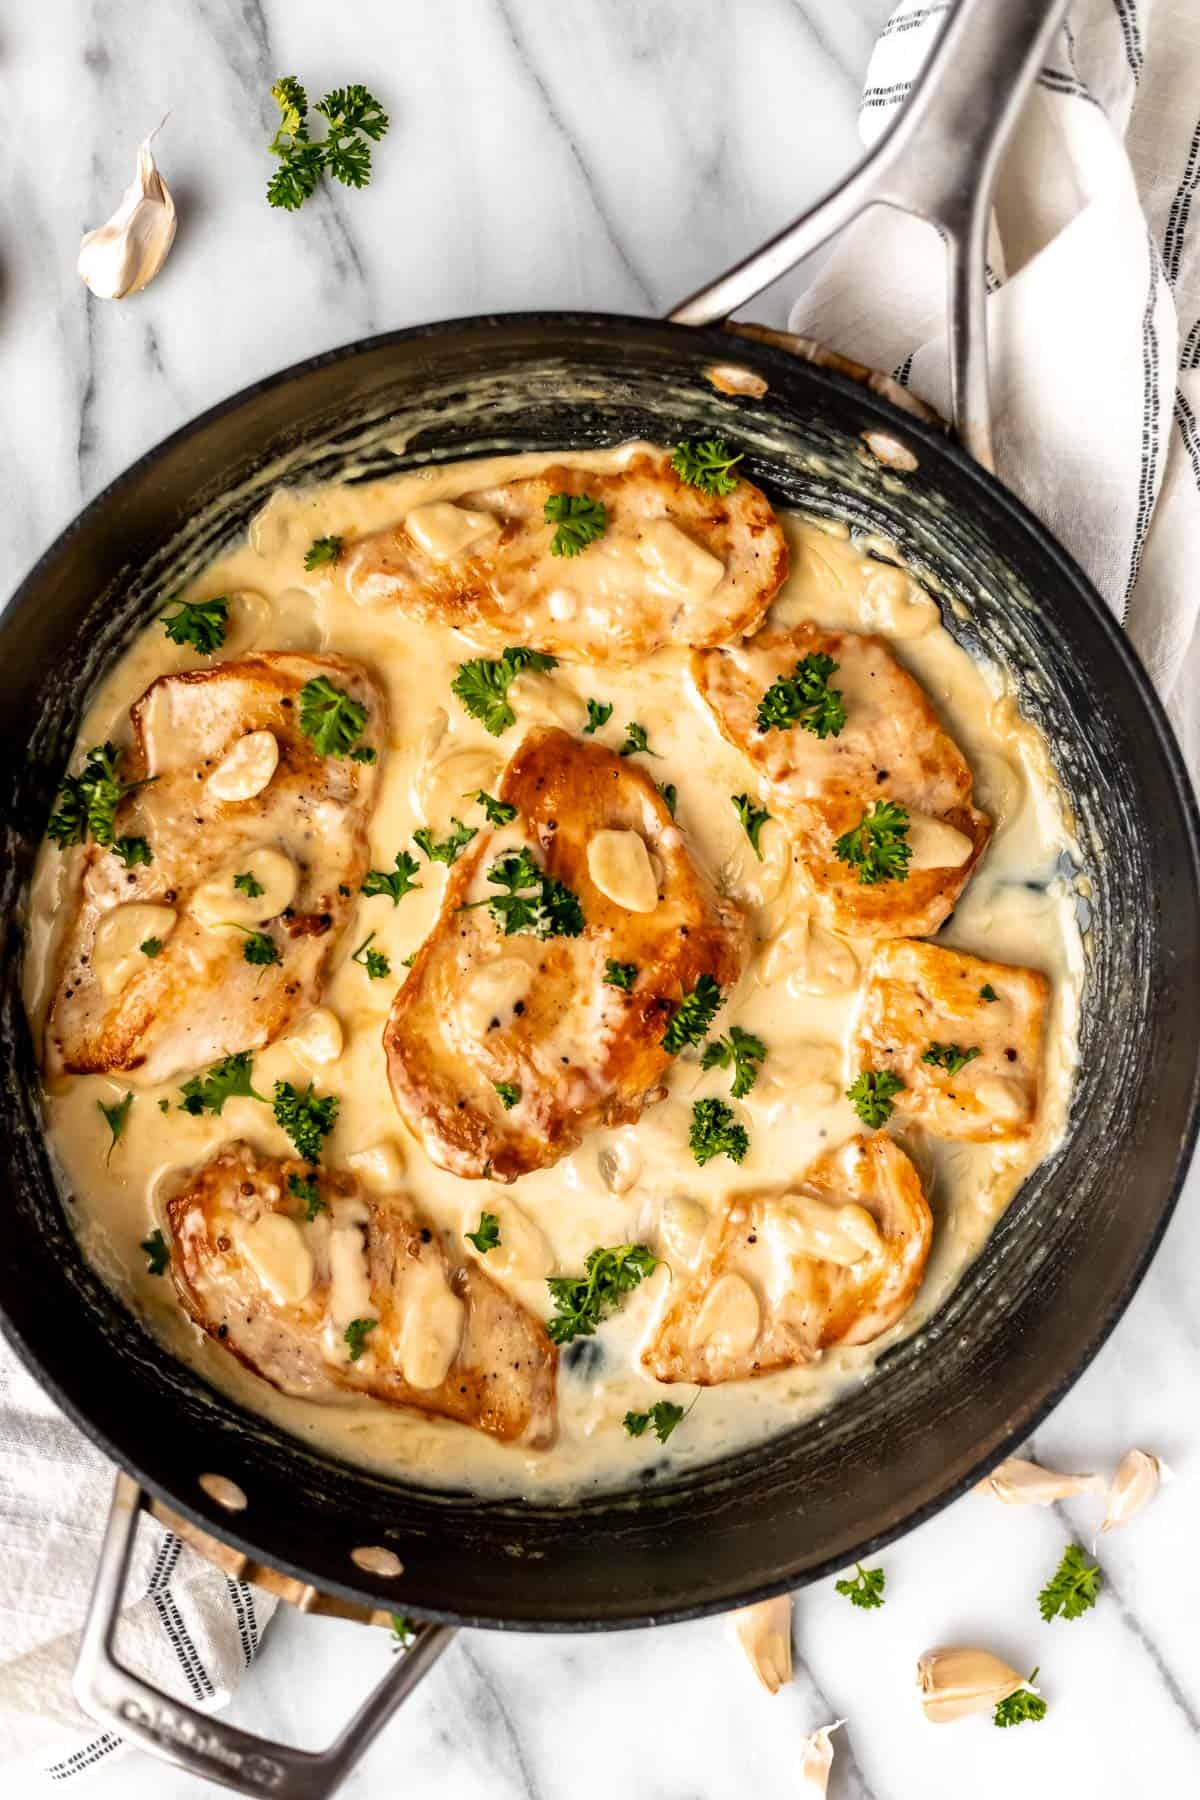 Overhead of creamy garlic chicken garnished with fresh parsley in a black skillet over a marble background.